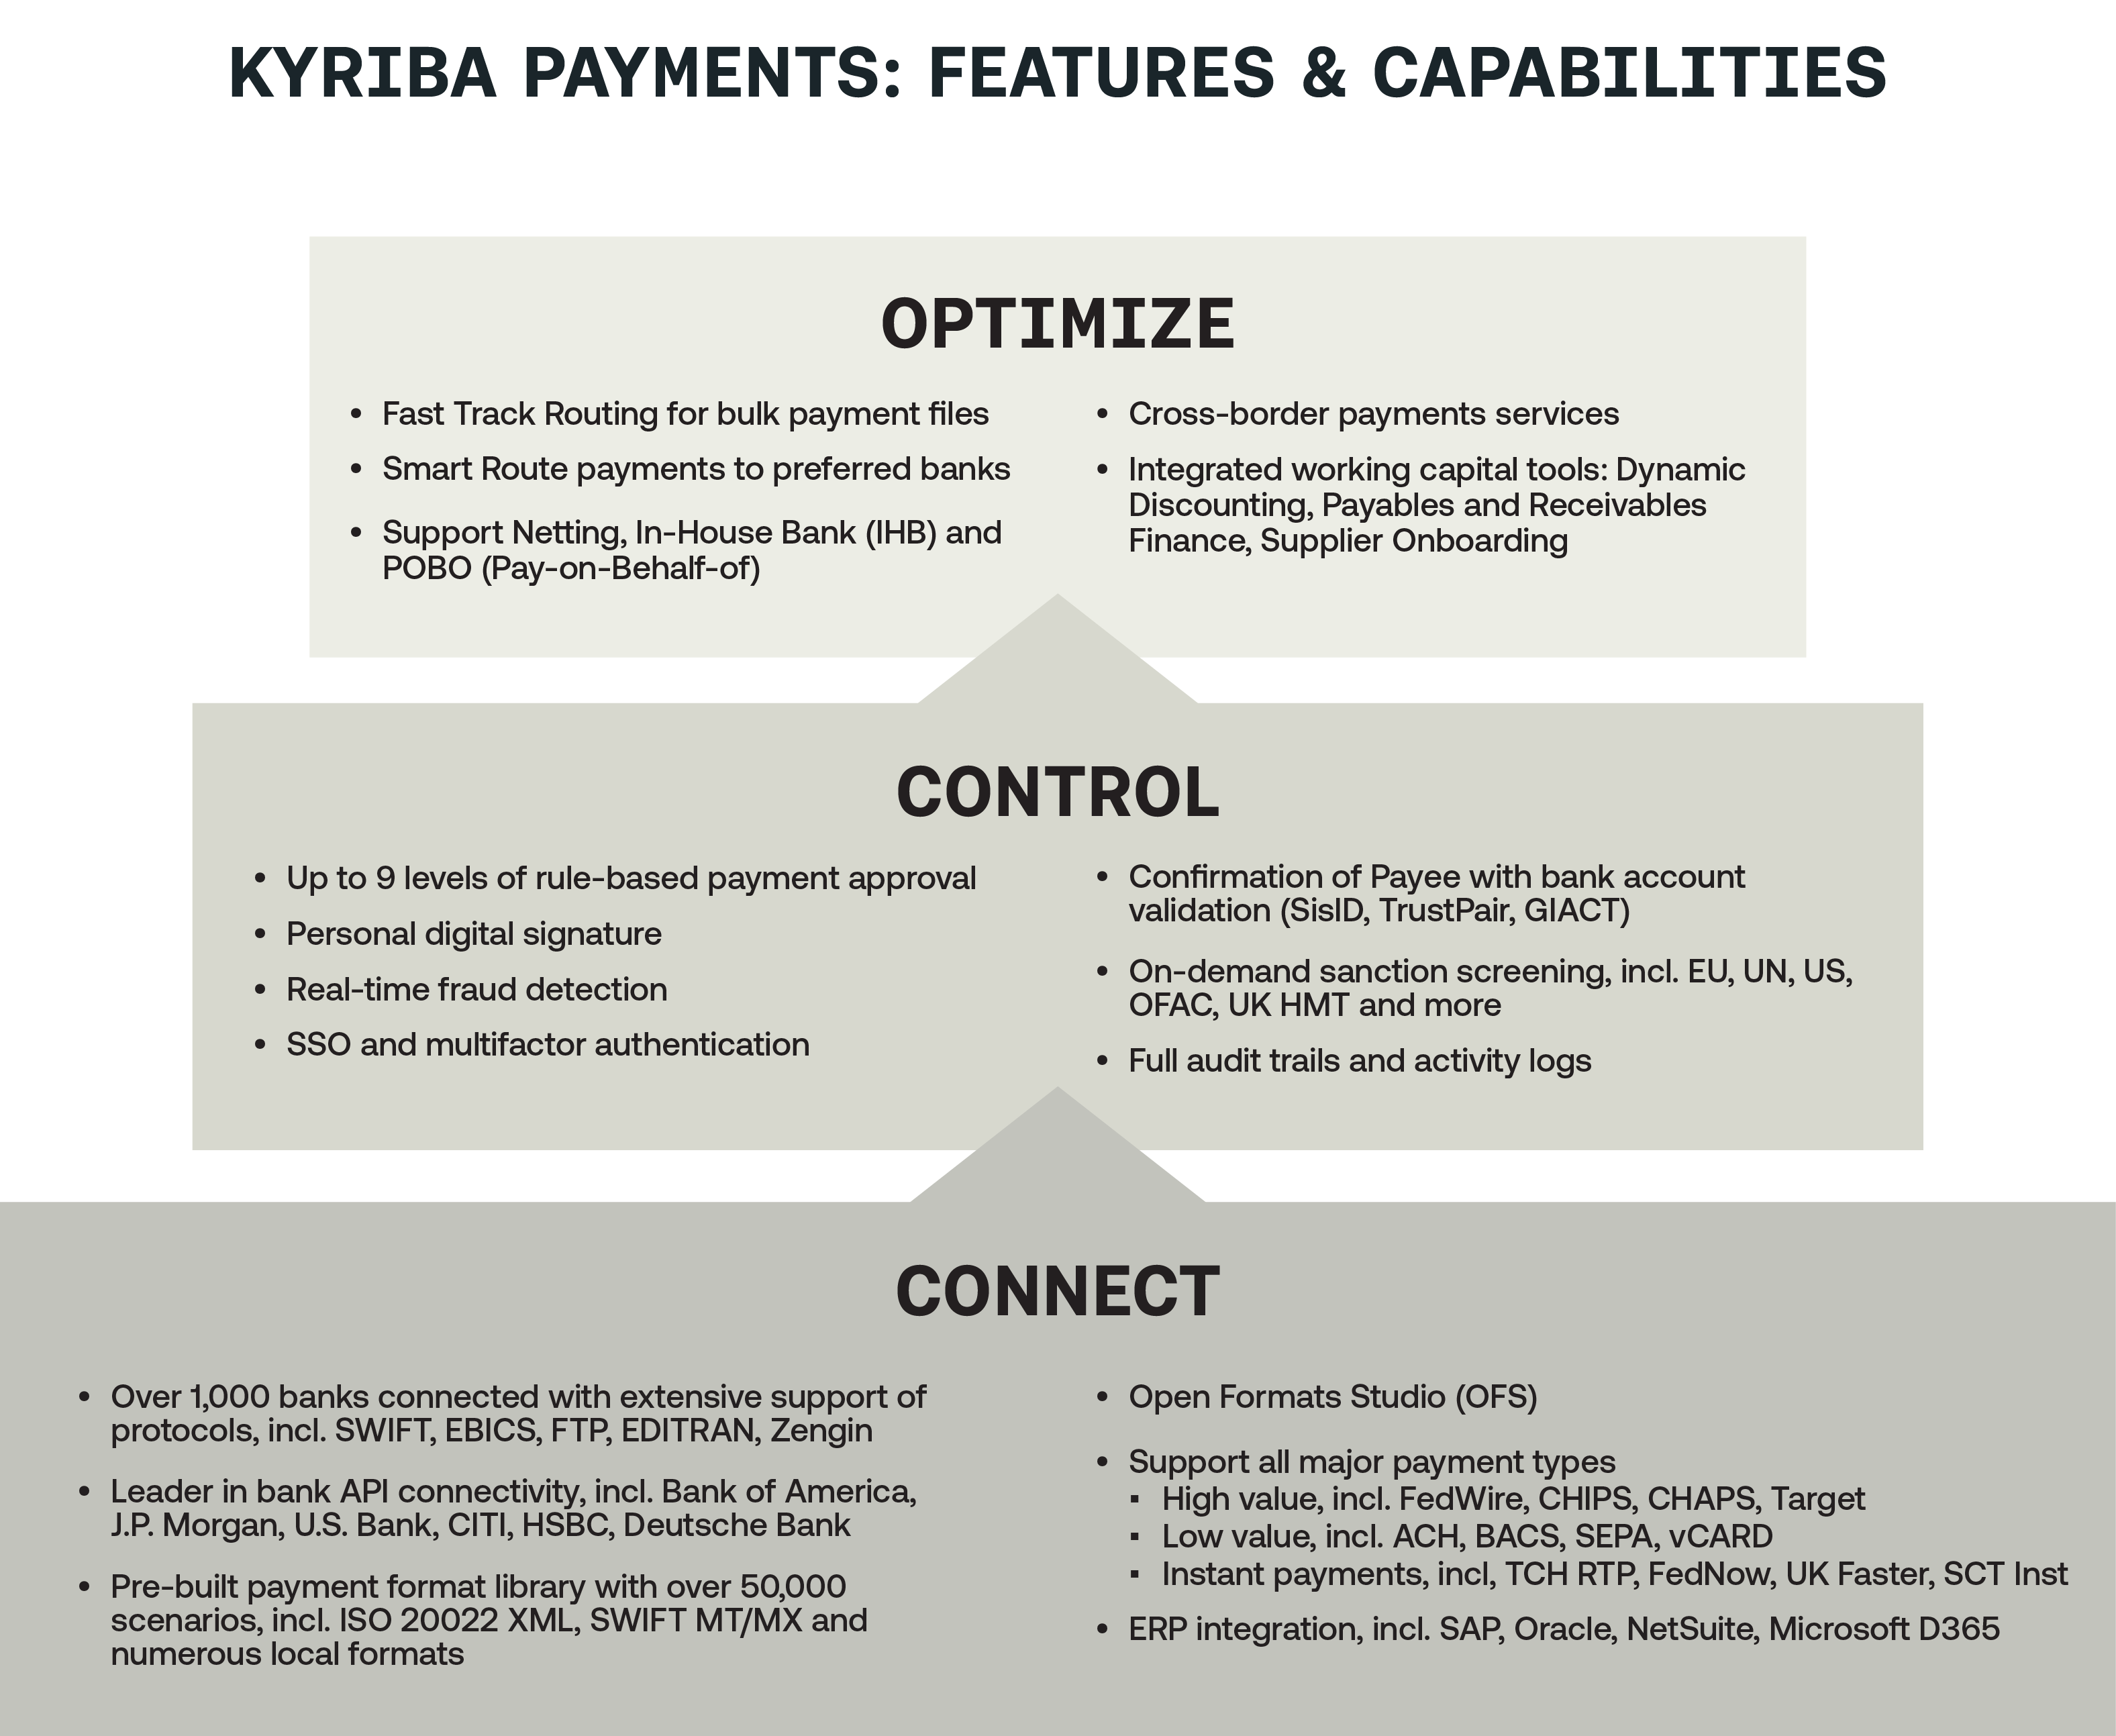 Kyriba Payments: Features & Capabilities